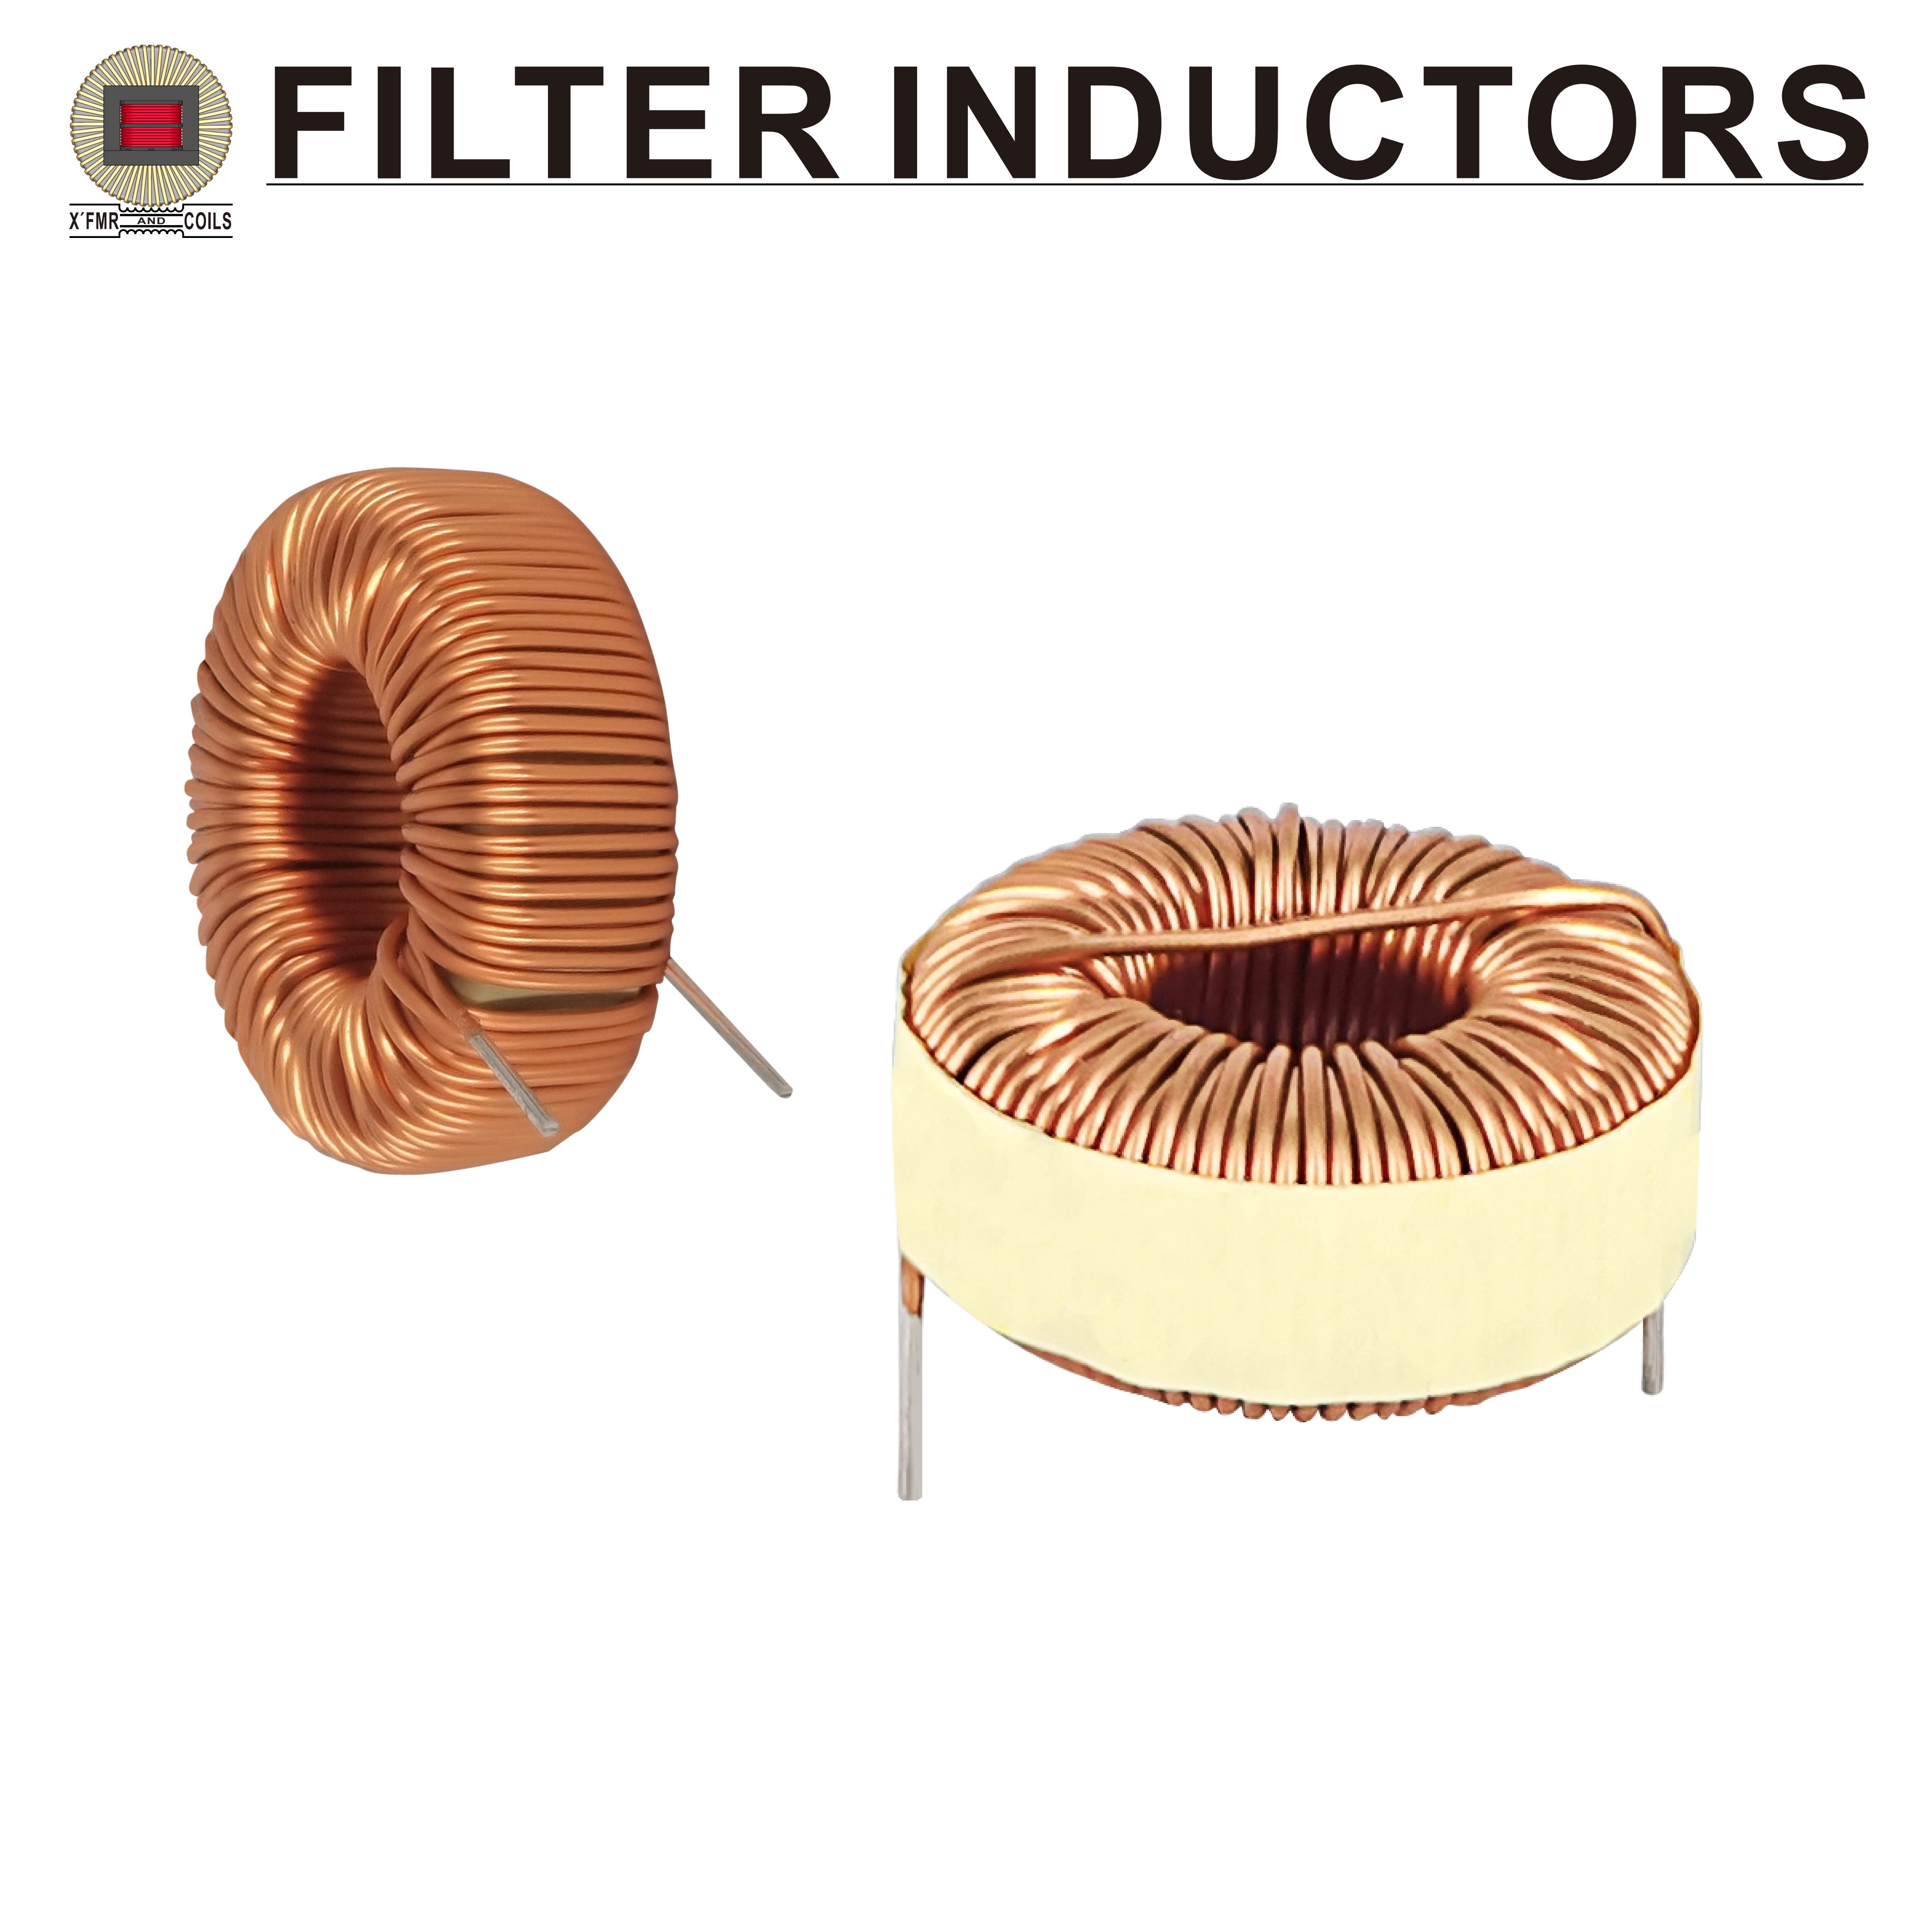 Filter Inductors FI-04 Series